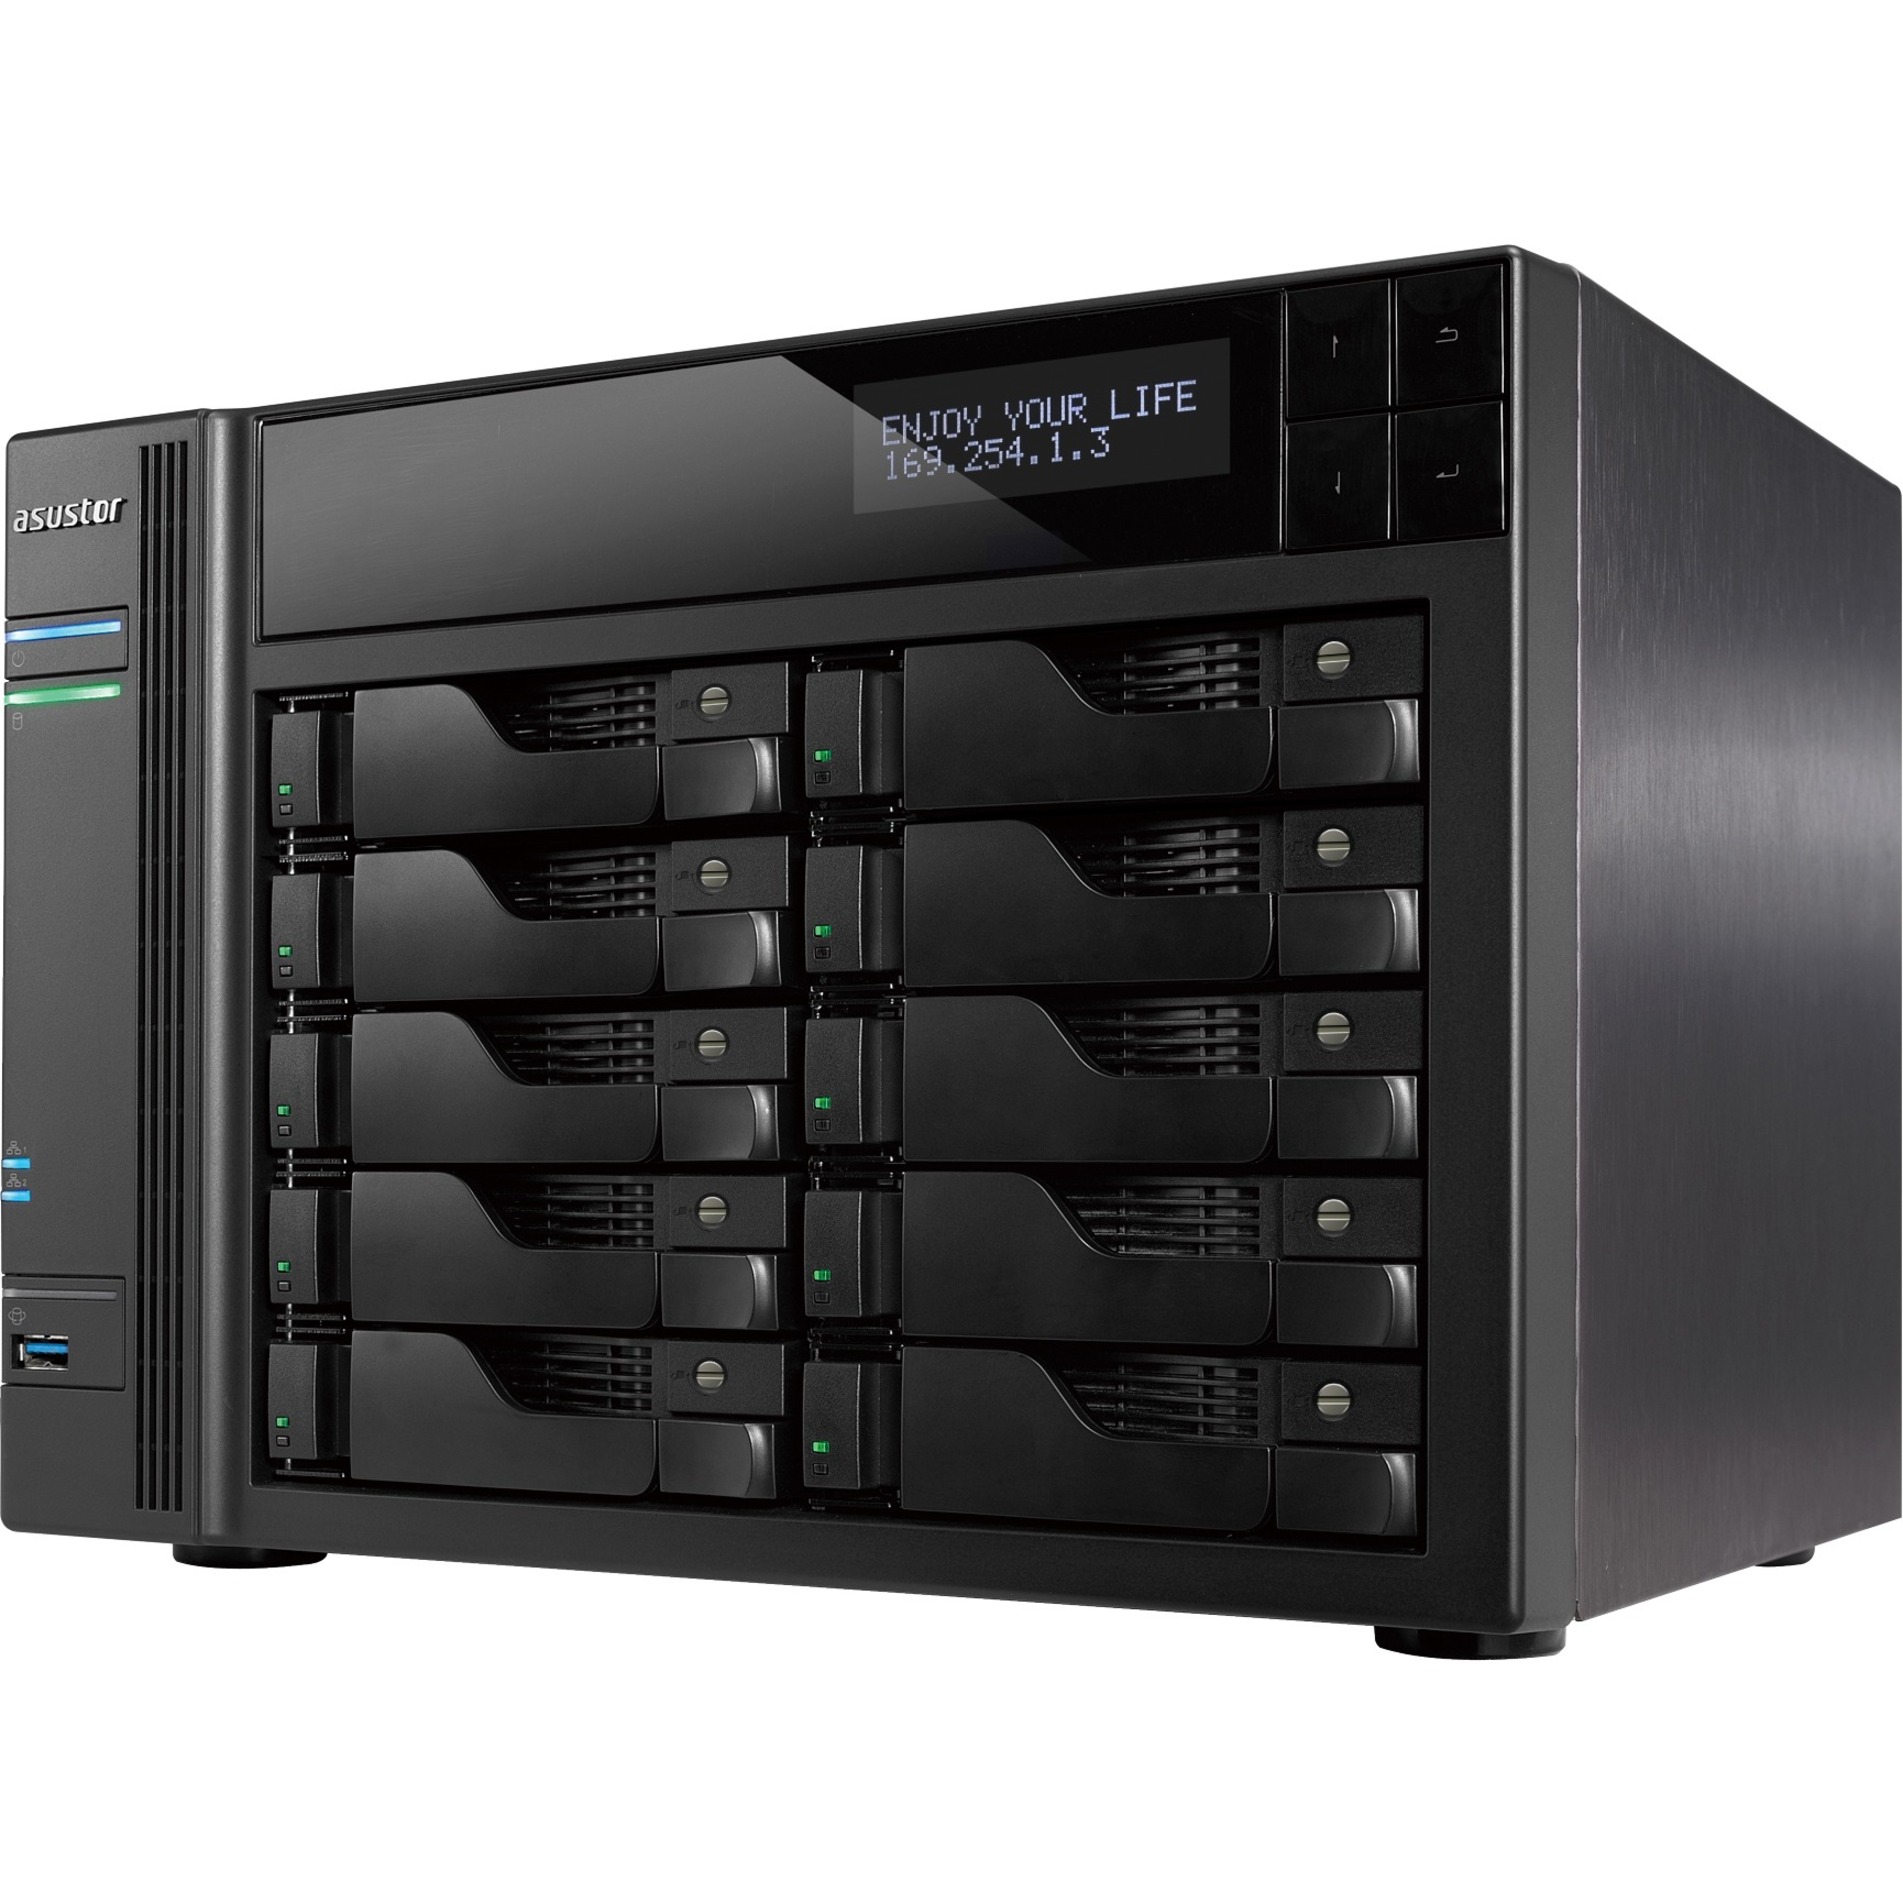 Asustor AS6210T 10-Bay NAS, Intel Celeron Quad-Core, 4 GB SO-DIMM DDR3L, GbE x 4, PCI-E (10GbE ready), USB 3.0 & eSATA, WoL, System Sleep Mode, AES-NI hardware encryption,with lockable tray - image 2 of 6